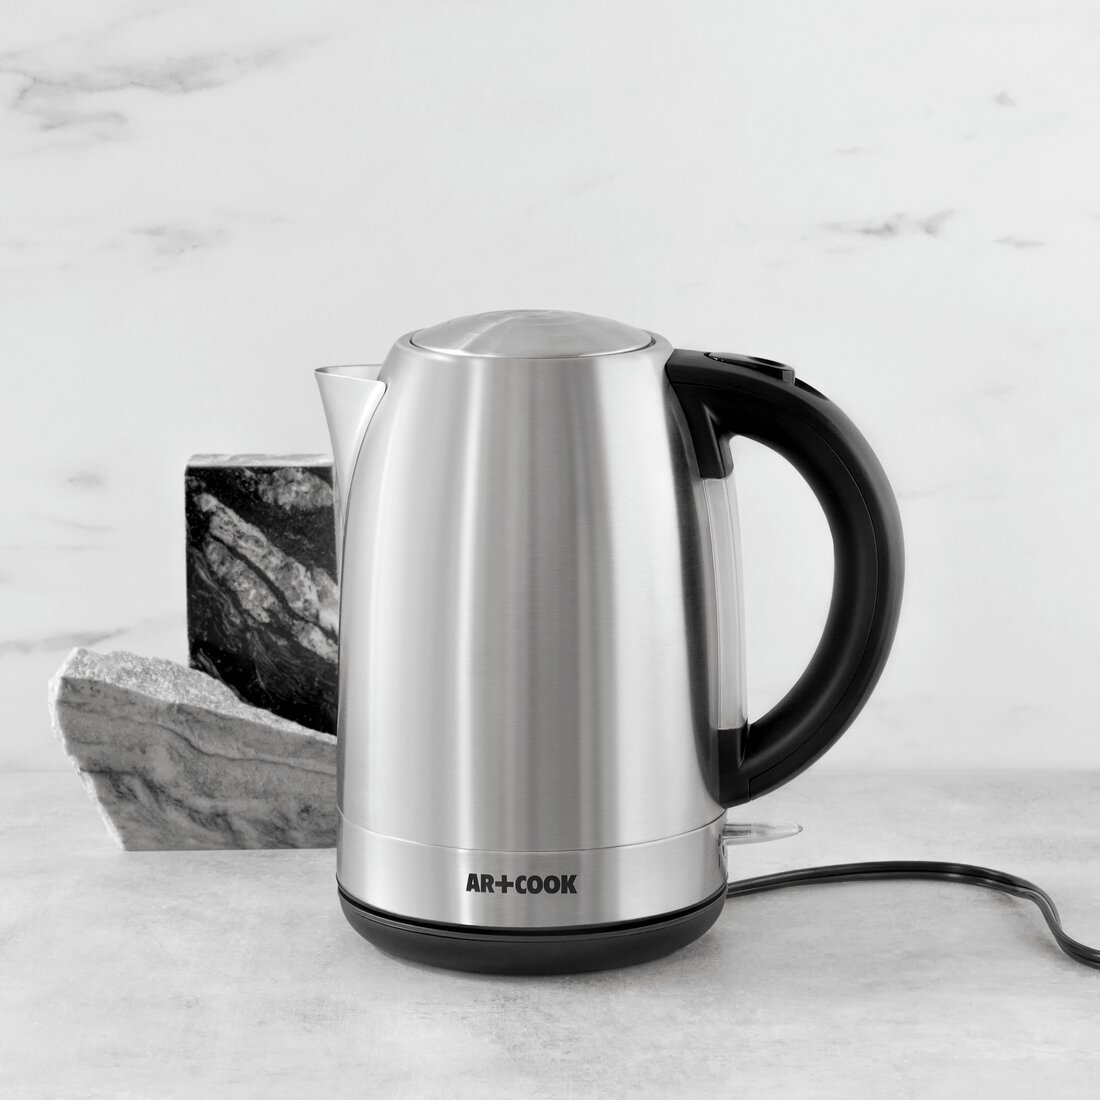 AROMA Professional 1.7 L 7-Cup Electric Kettle AWK-1800SD